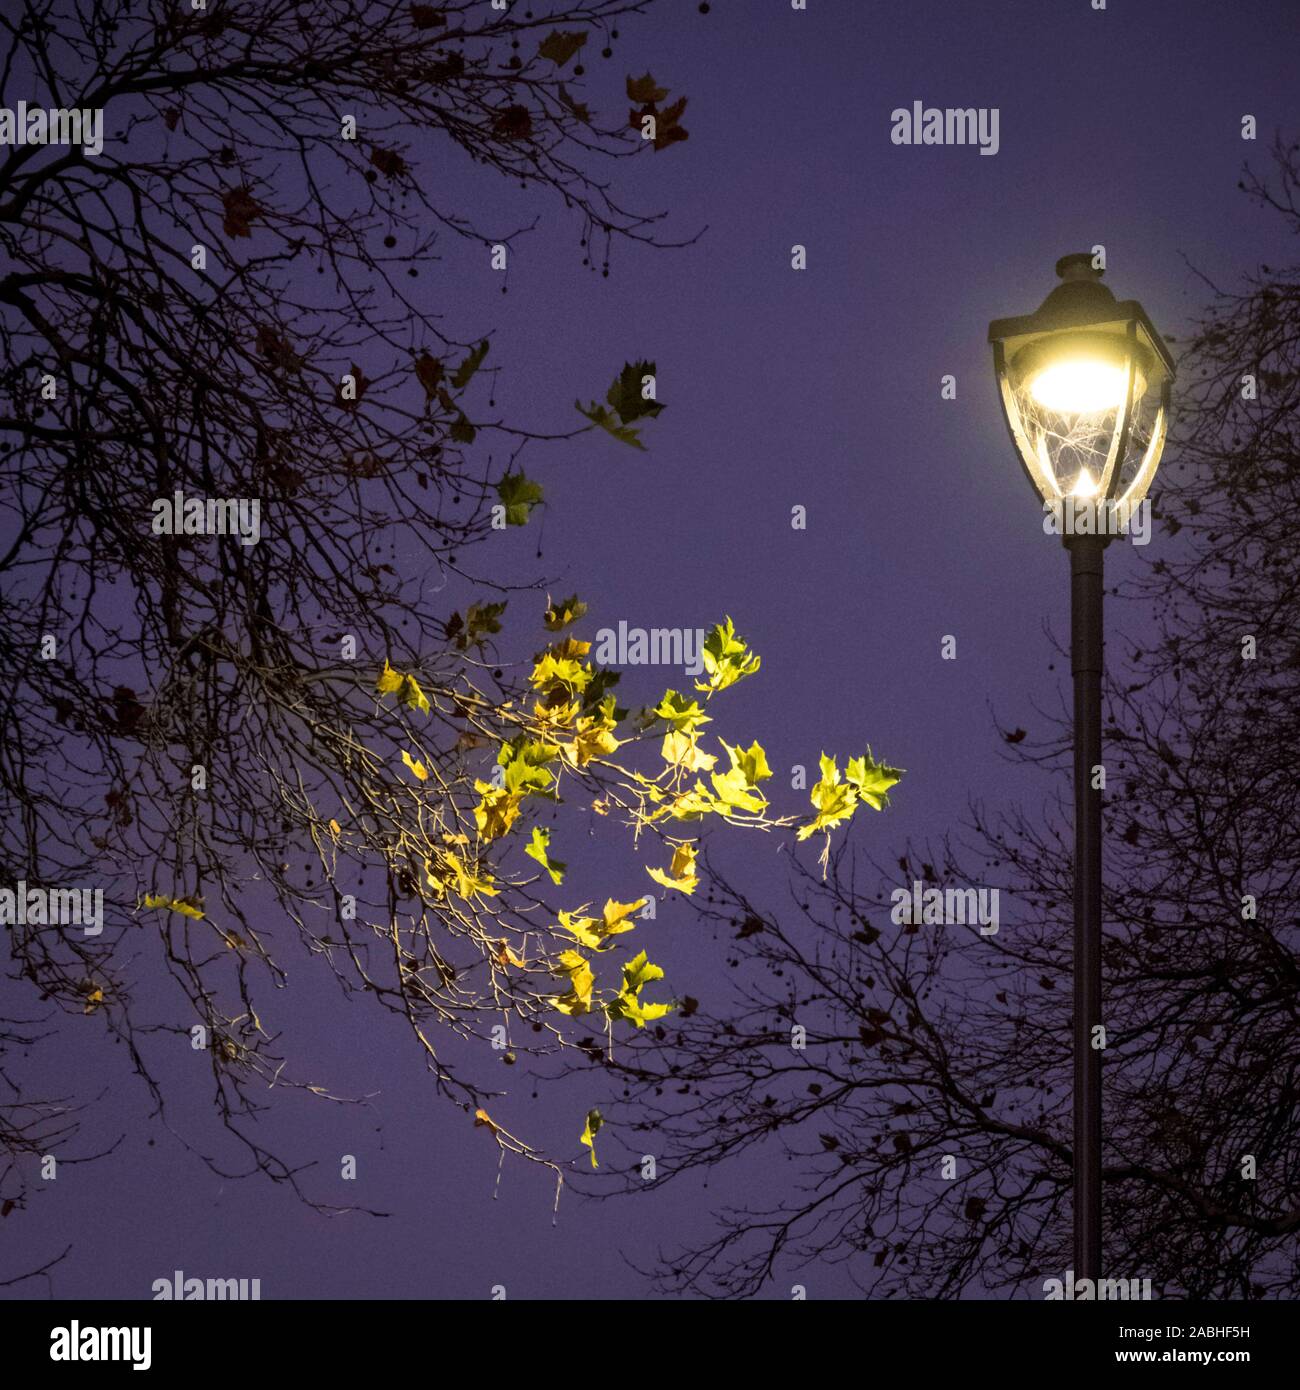 Street light among trees at night lighting up some of the last few leaves on a tree in Autumn, England, UK Stock Photo